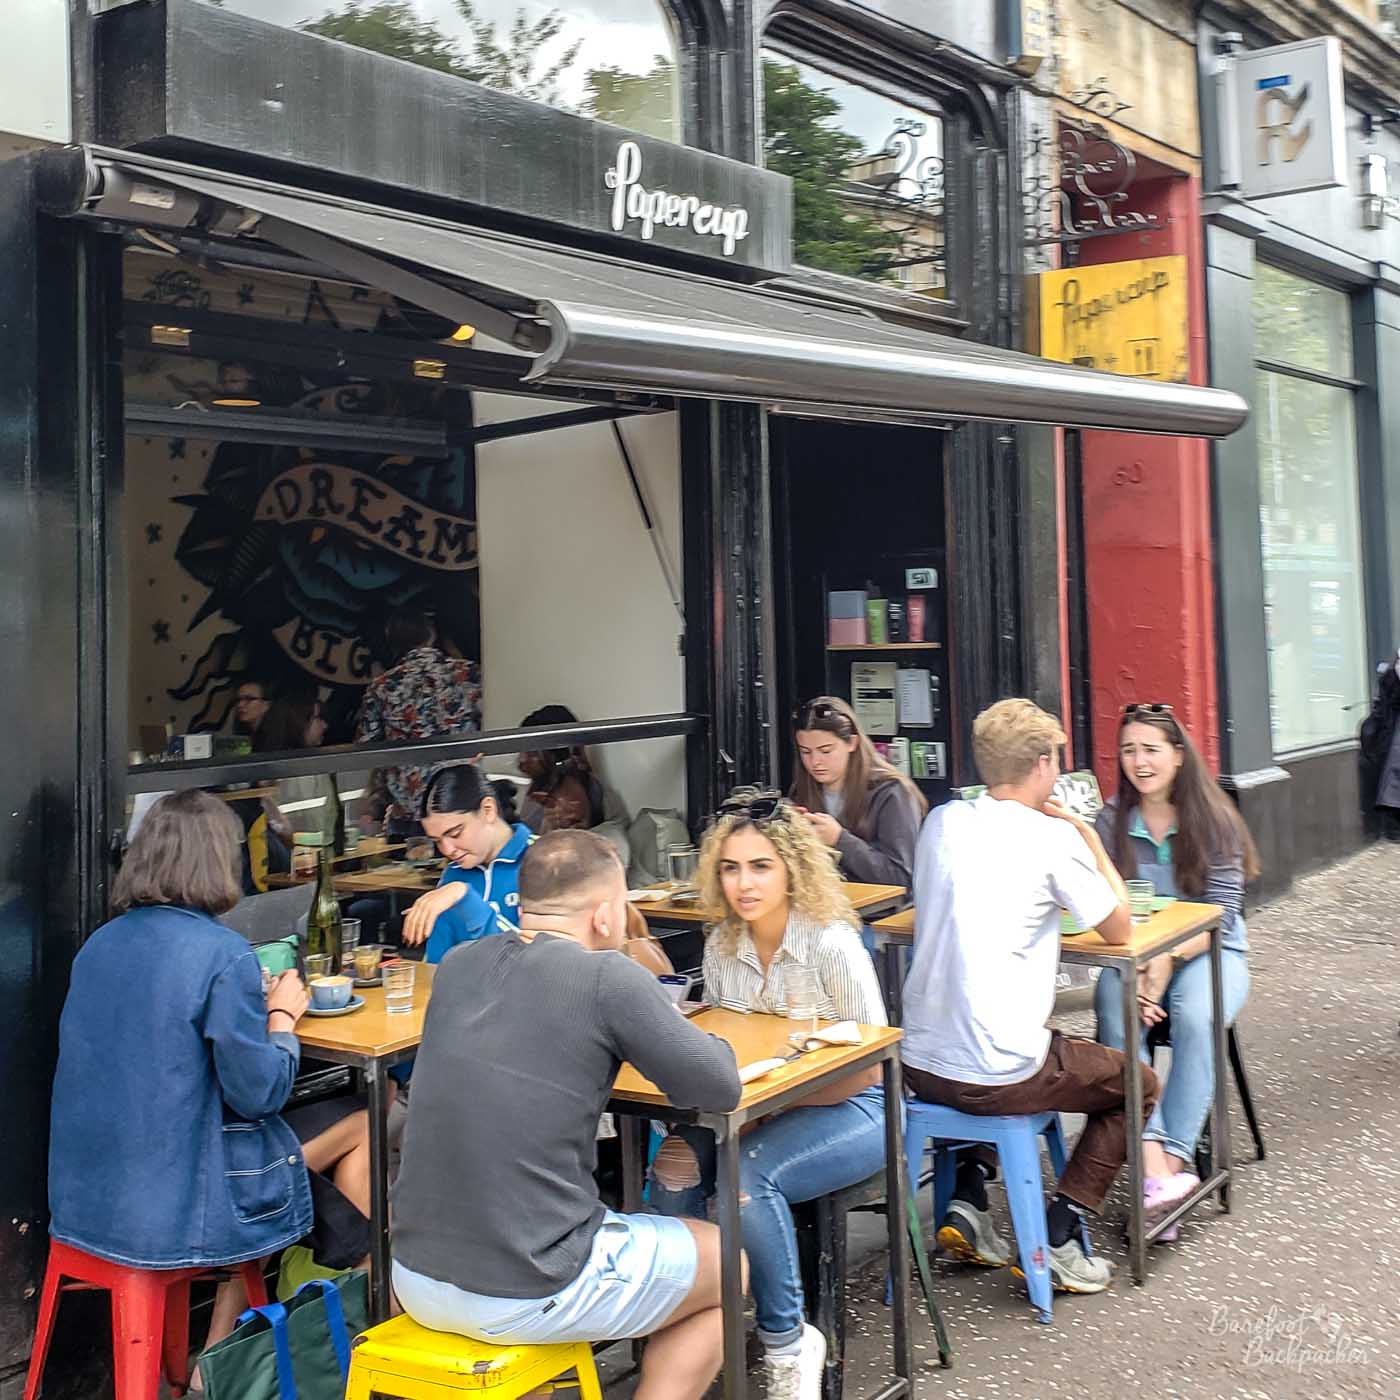 Four tables, each with two people on, on a street outside the cafe's front. The tables are underneath a canopy.